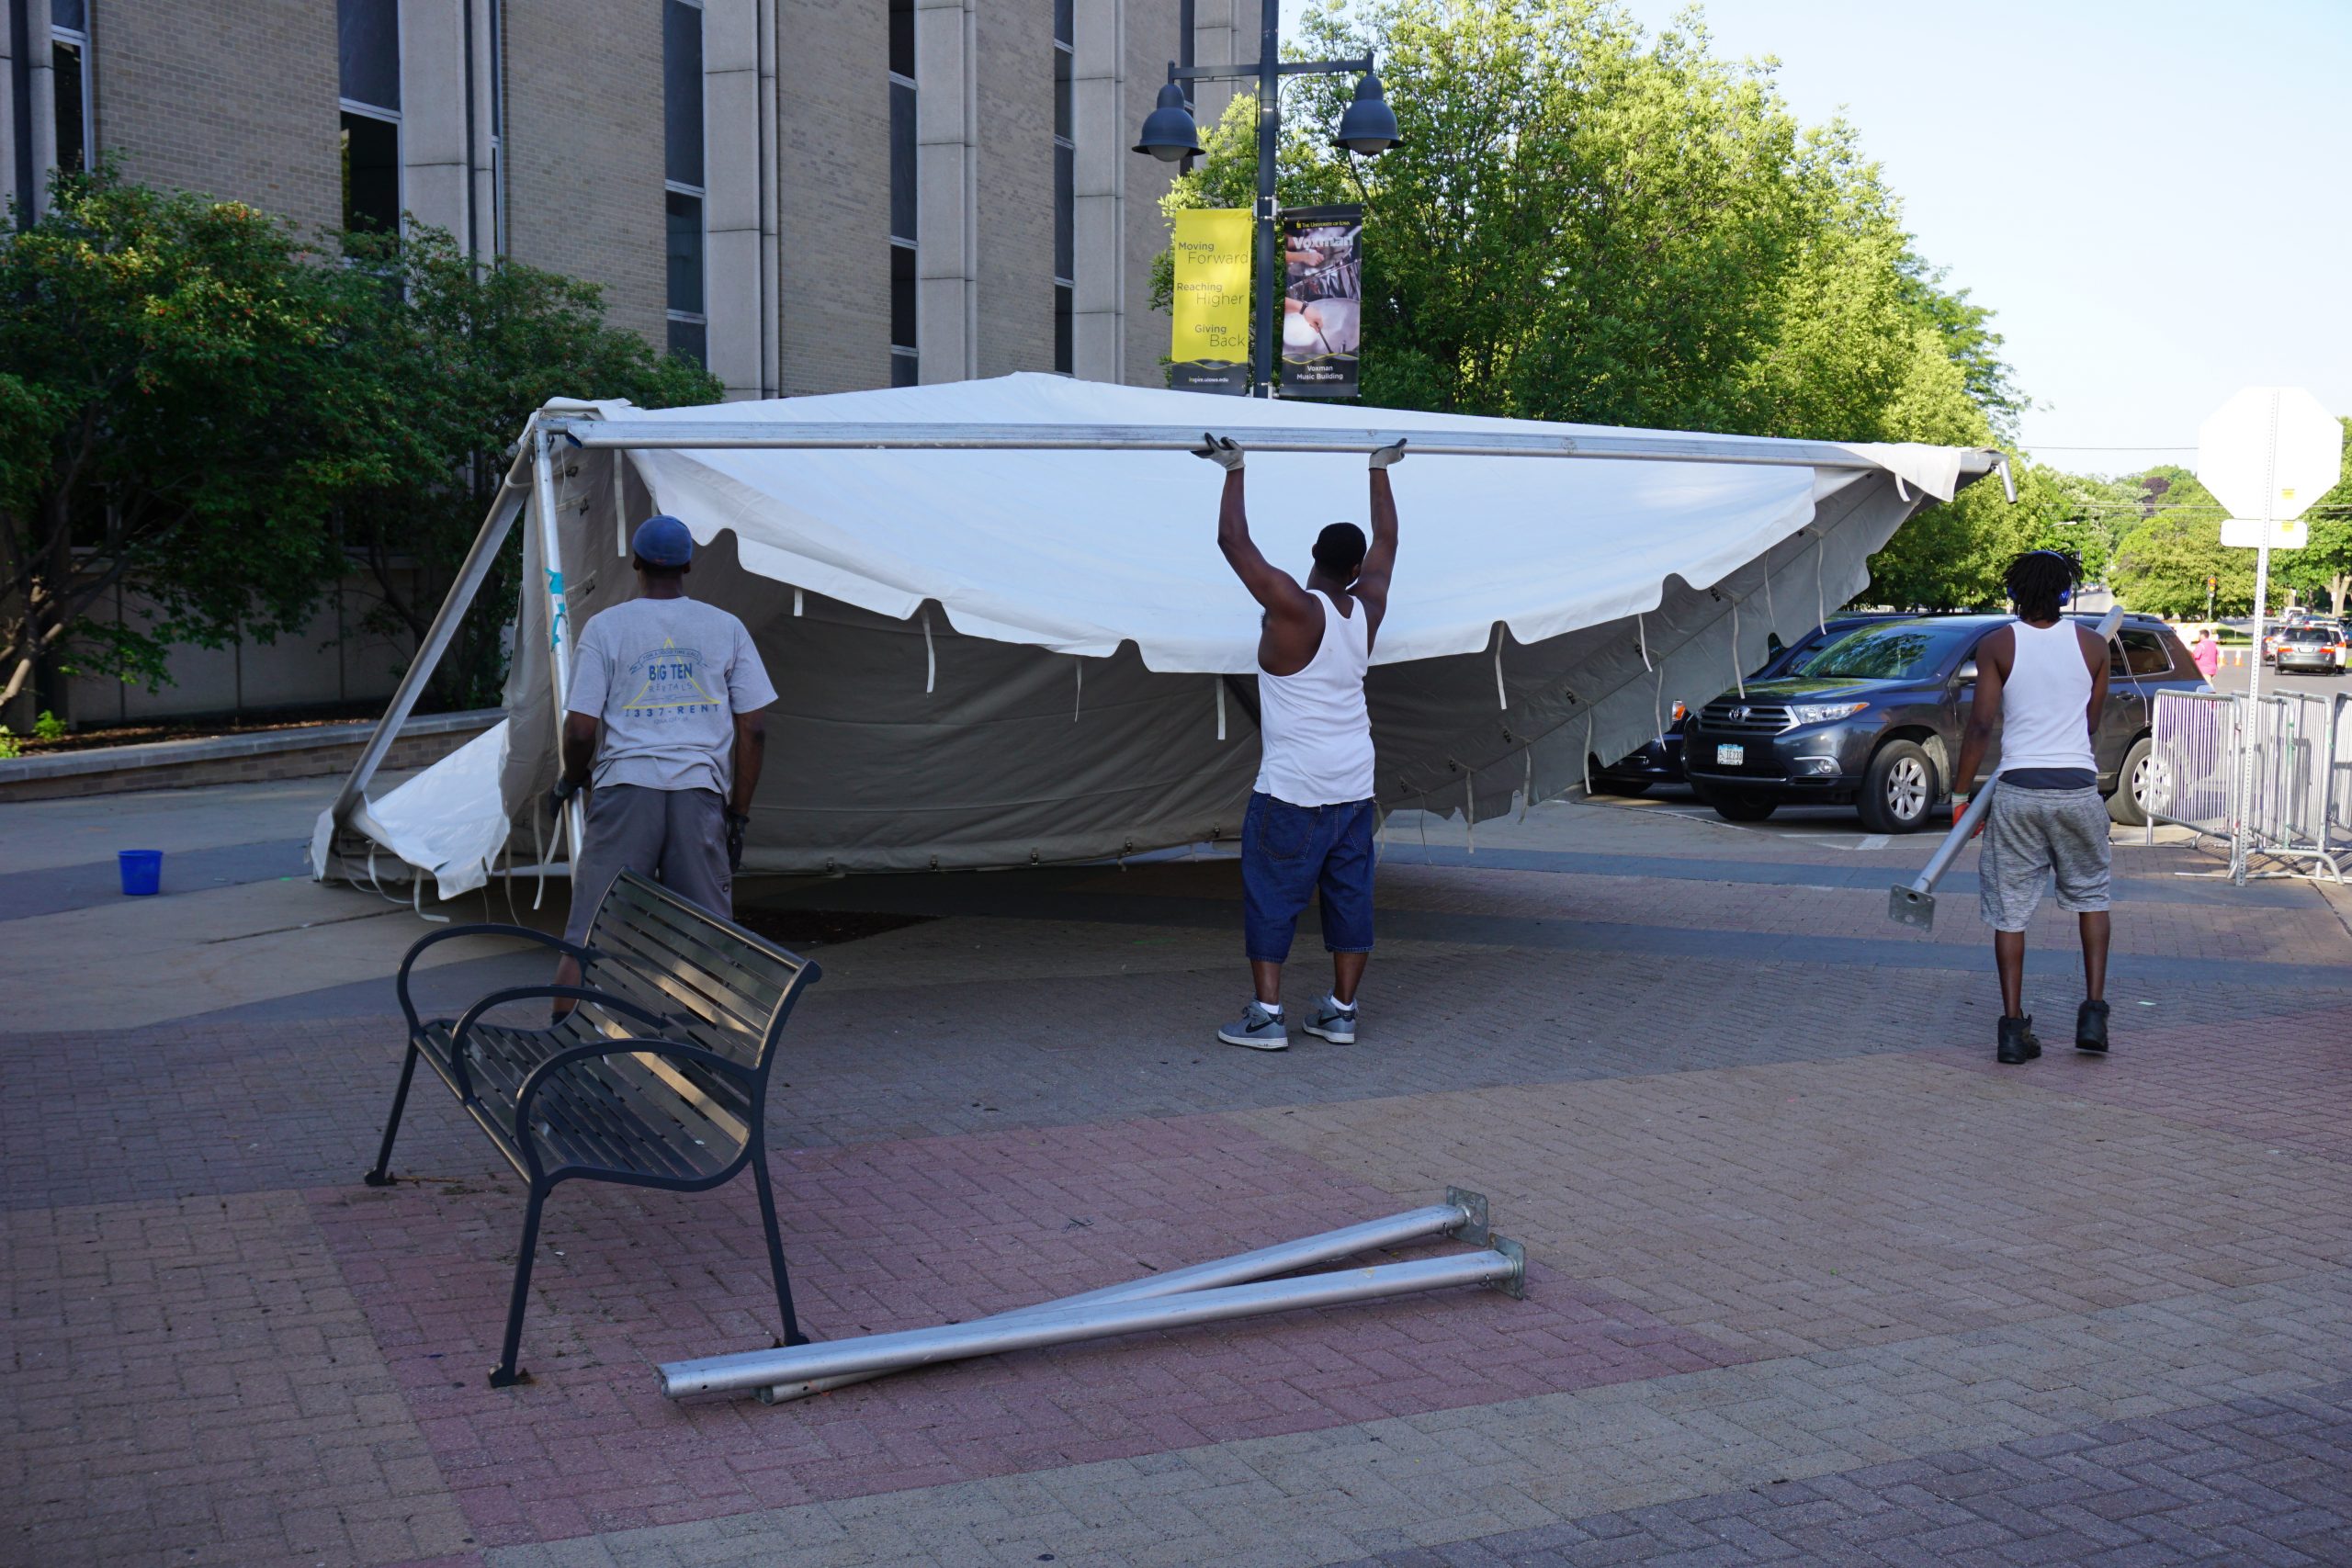 20' x 20' frame tent being assembled at the 2016 Iowa Arts Fest setup